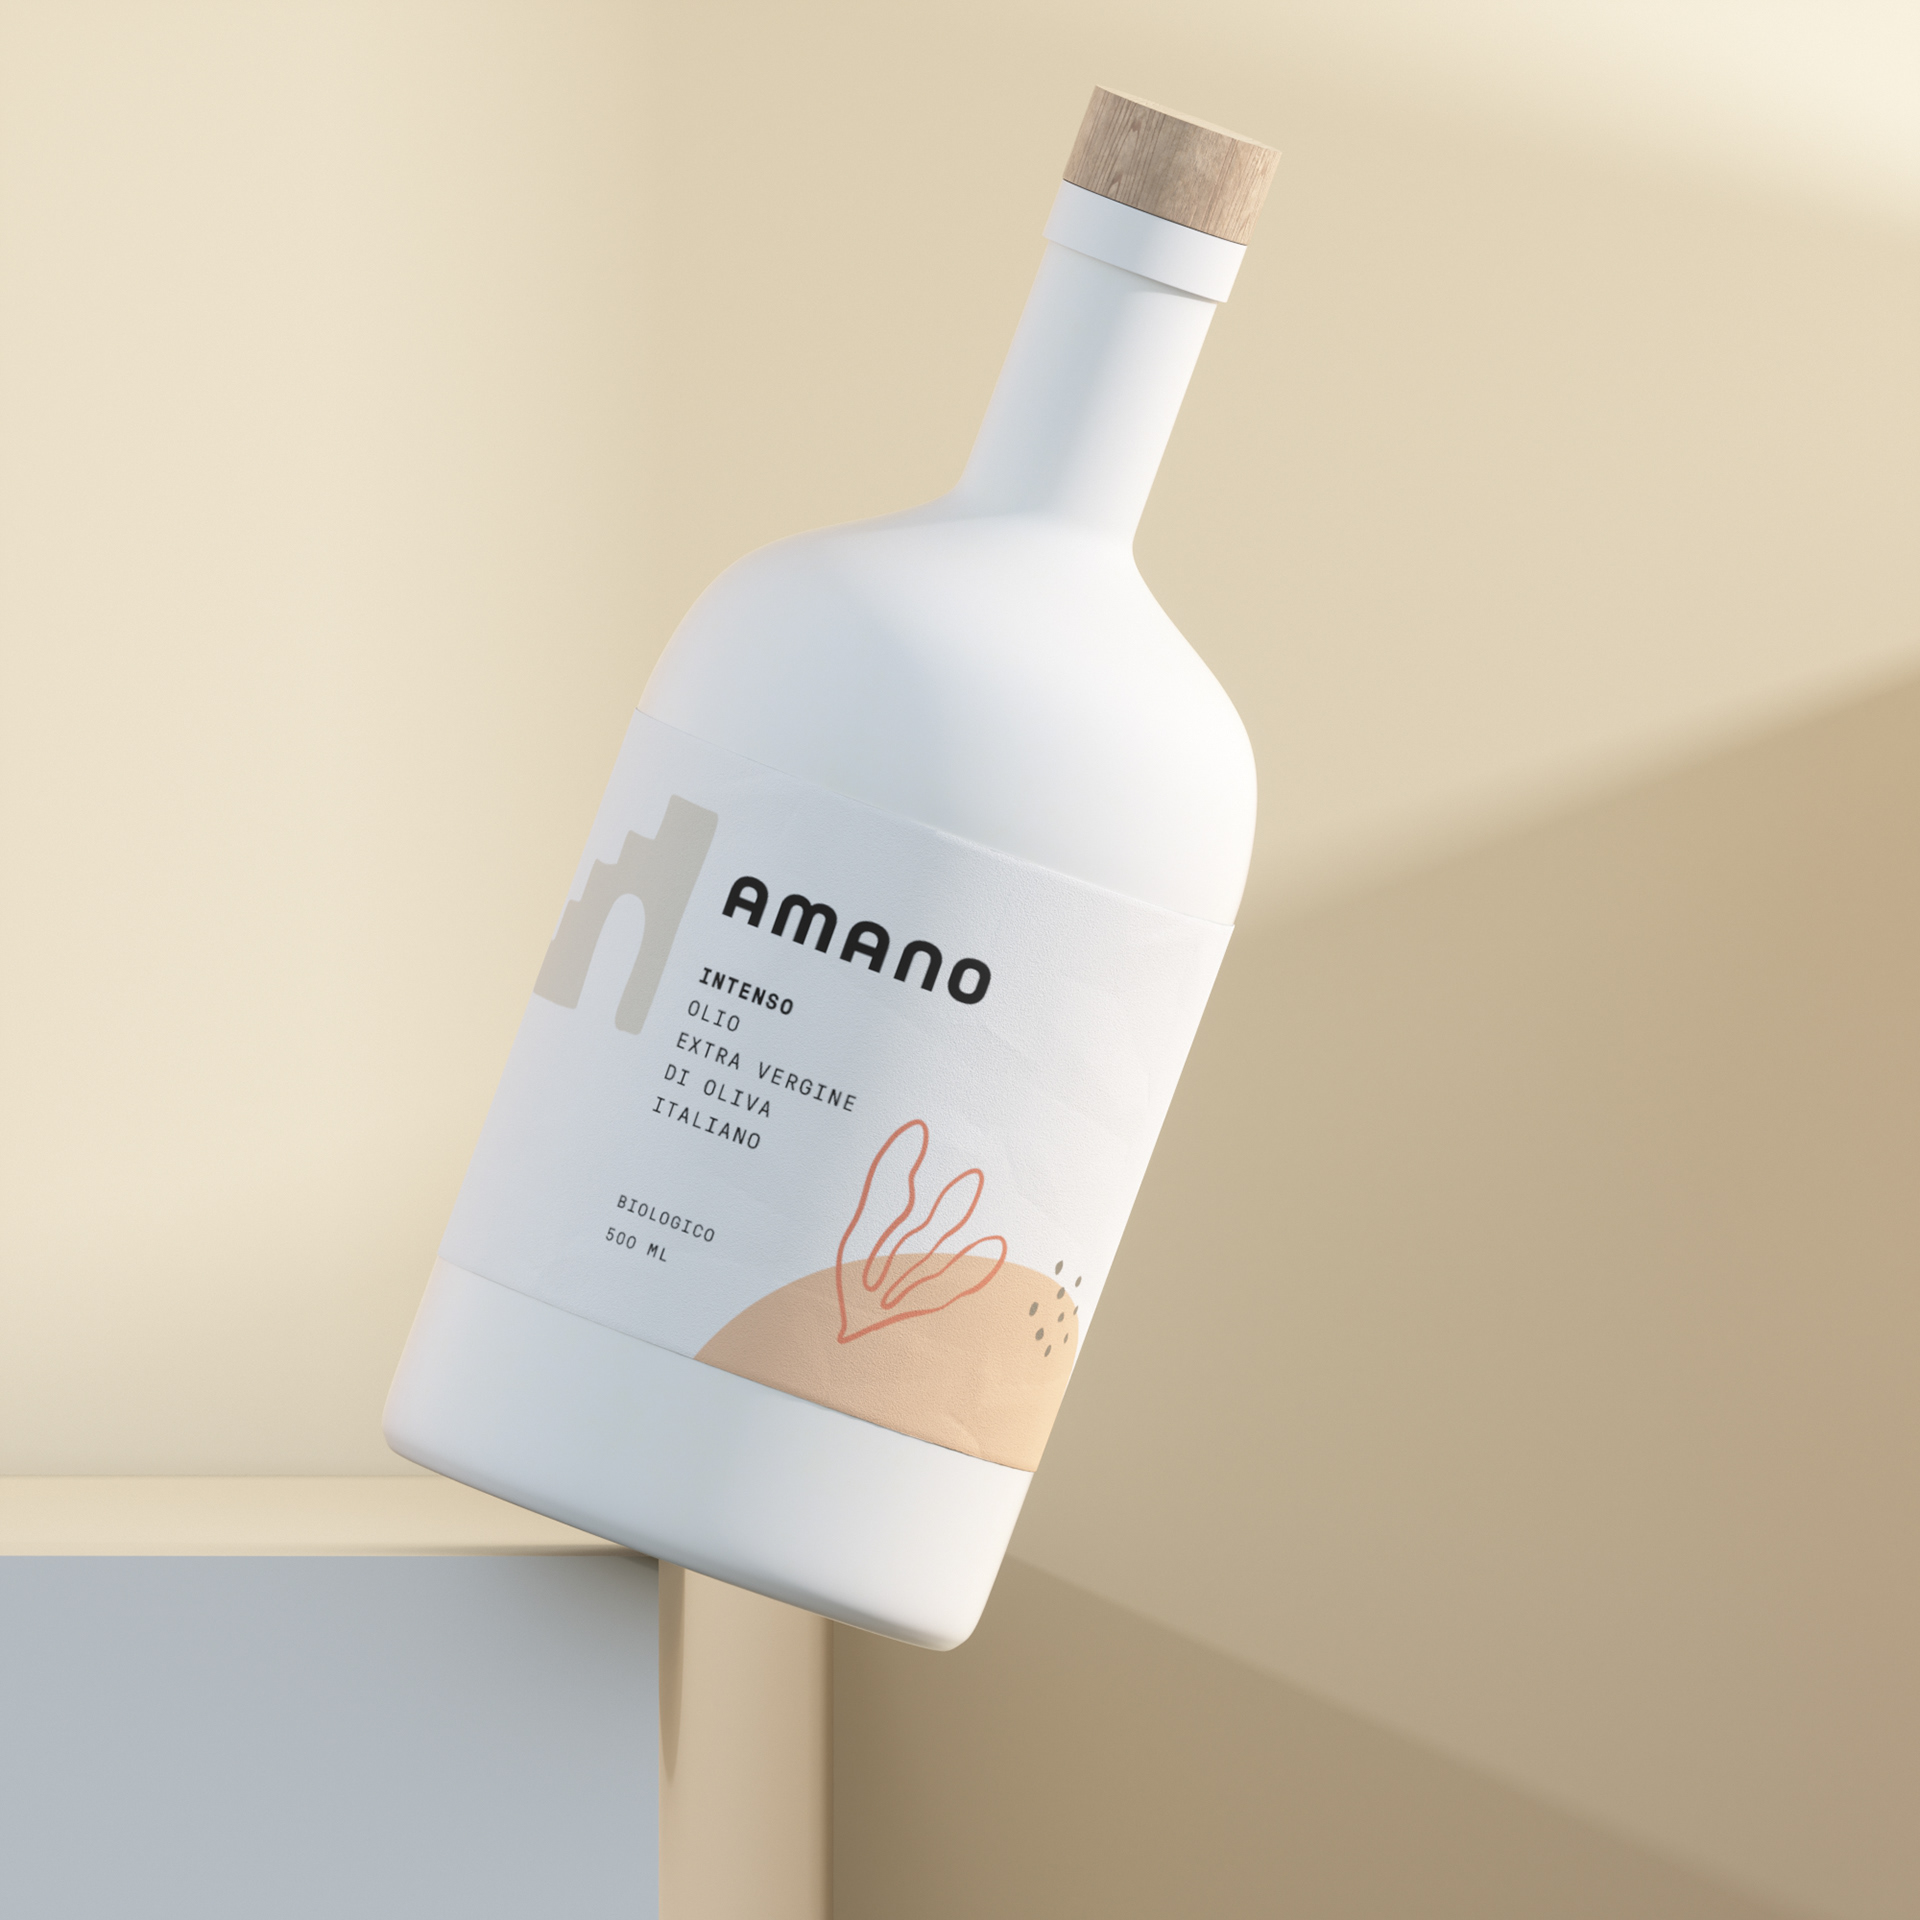 Amano Olive Oil Branding and Packaging Design